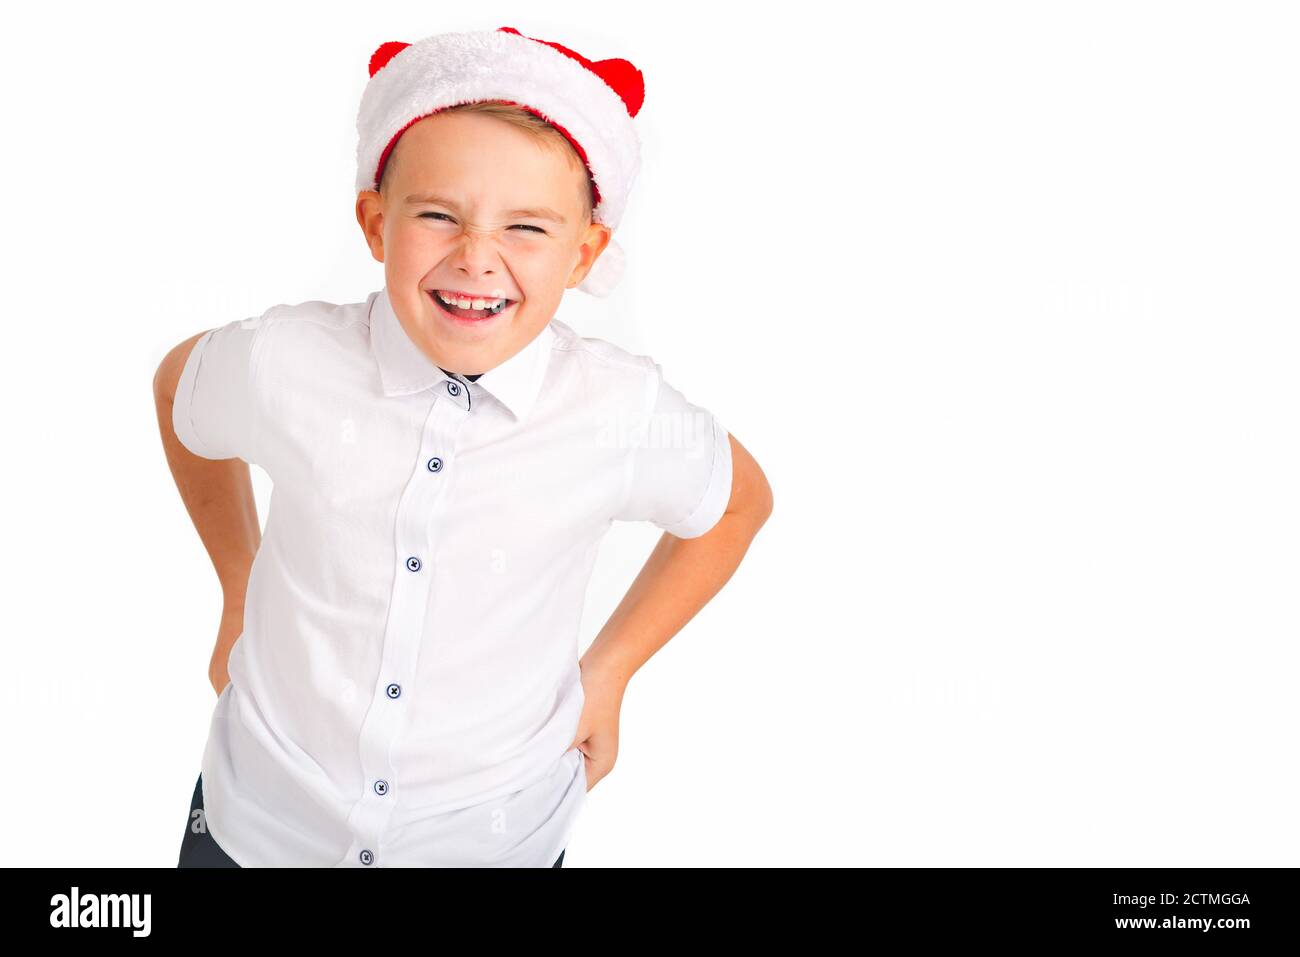 A young caucasian boy showing hand gesture. Kid portrait gesturing with fingers against. Funny emotions, facial expression, body language. Stock Photo